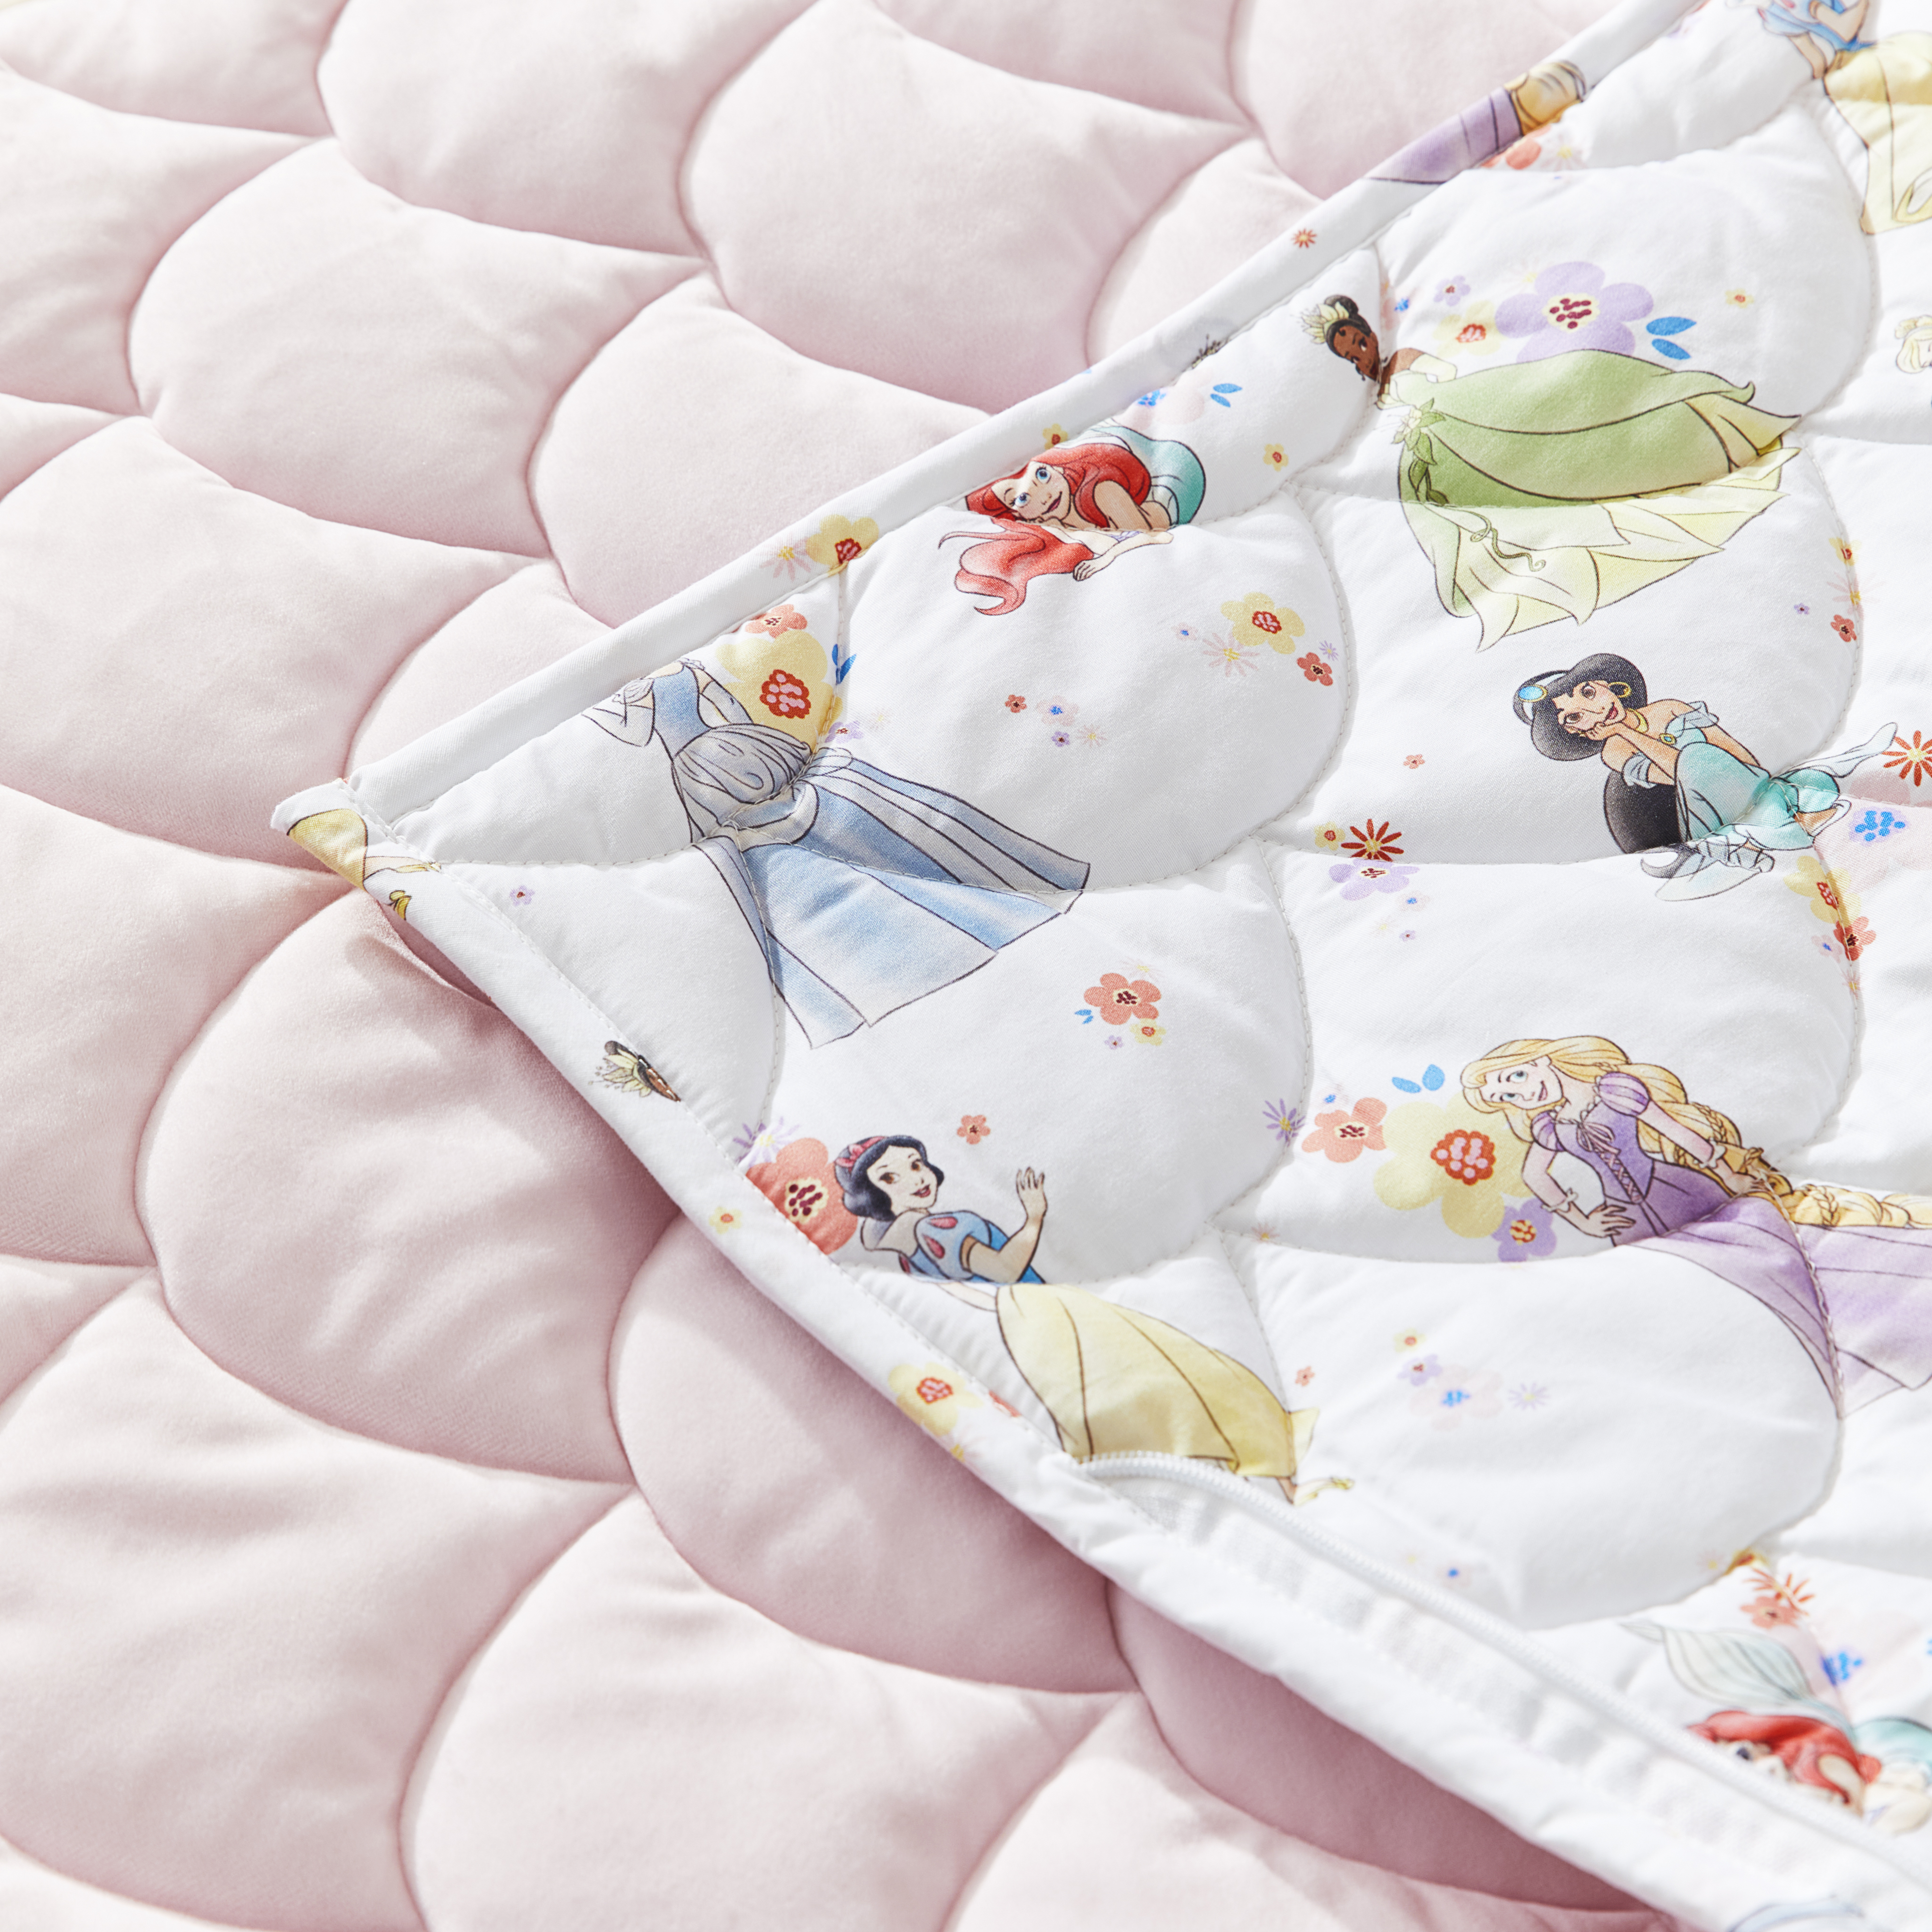 Snoopy Sleeping Bag  25 Amazing Holiday Gifts From Pottery Barn Kids   POPSUGAR Family Photo 21